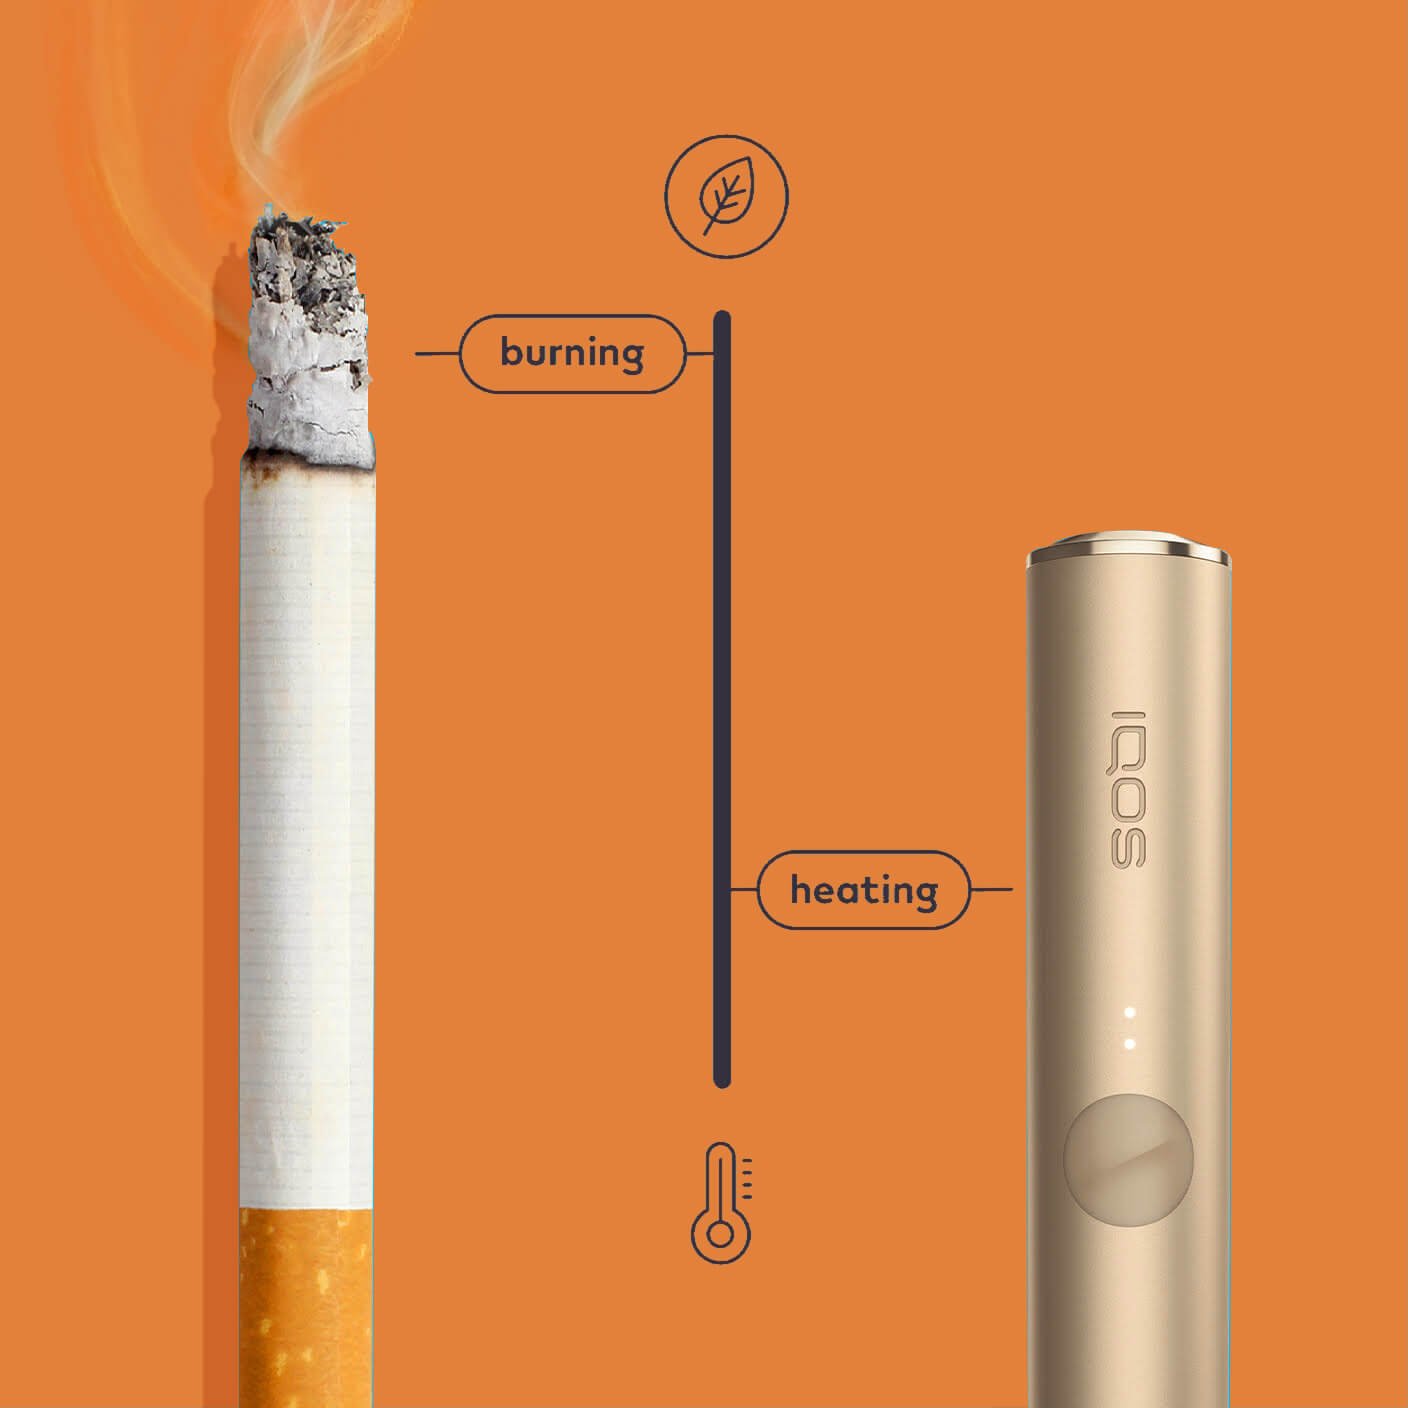 Information about burning cigarette and heating IQOS